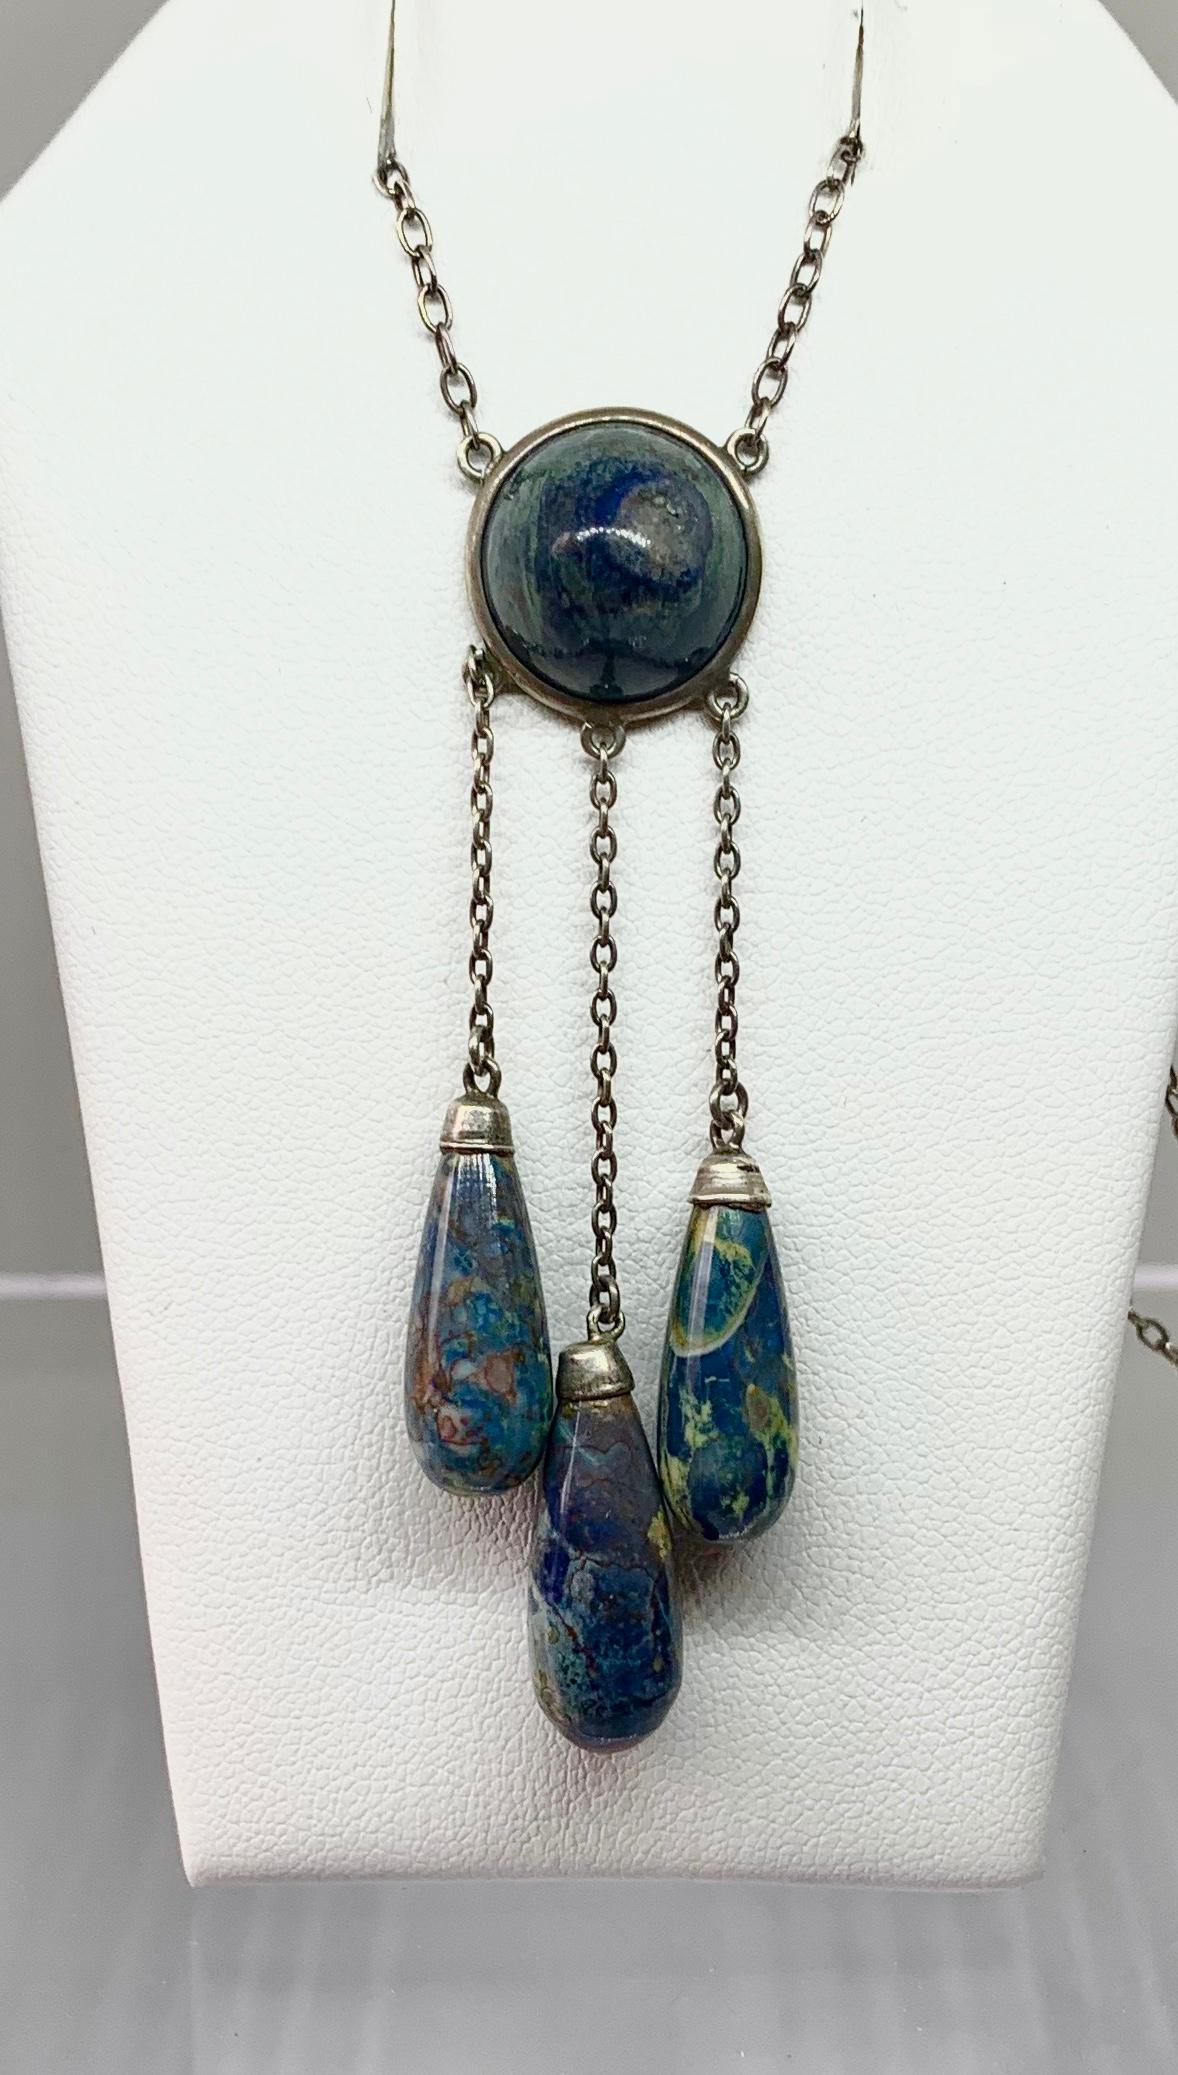 THIS IS A STUNNING ANTIQUE EDWARDIAN - ART DECO NEGLIGEE PENDANT DROP NECKLACE SET WITH GORGEOUS BLUE JASPER CABOCHONS AND PENDANTS IN SILVER DATING TO CIRCA 1910.
This is a stunning Art Deco - Edwardian necklace.  The wonderful blue jasper cabochon